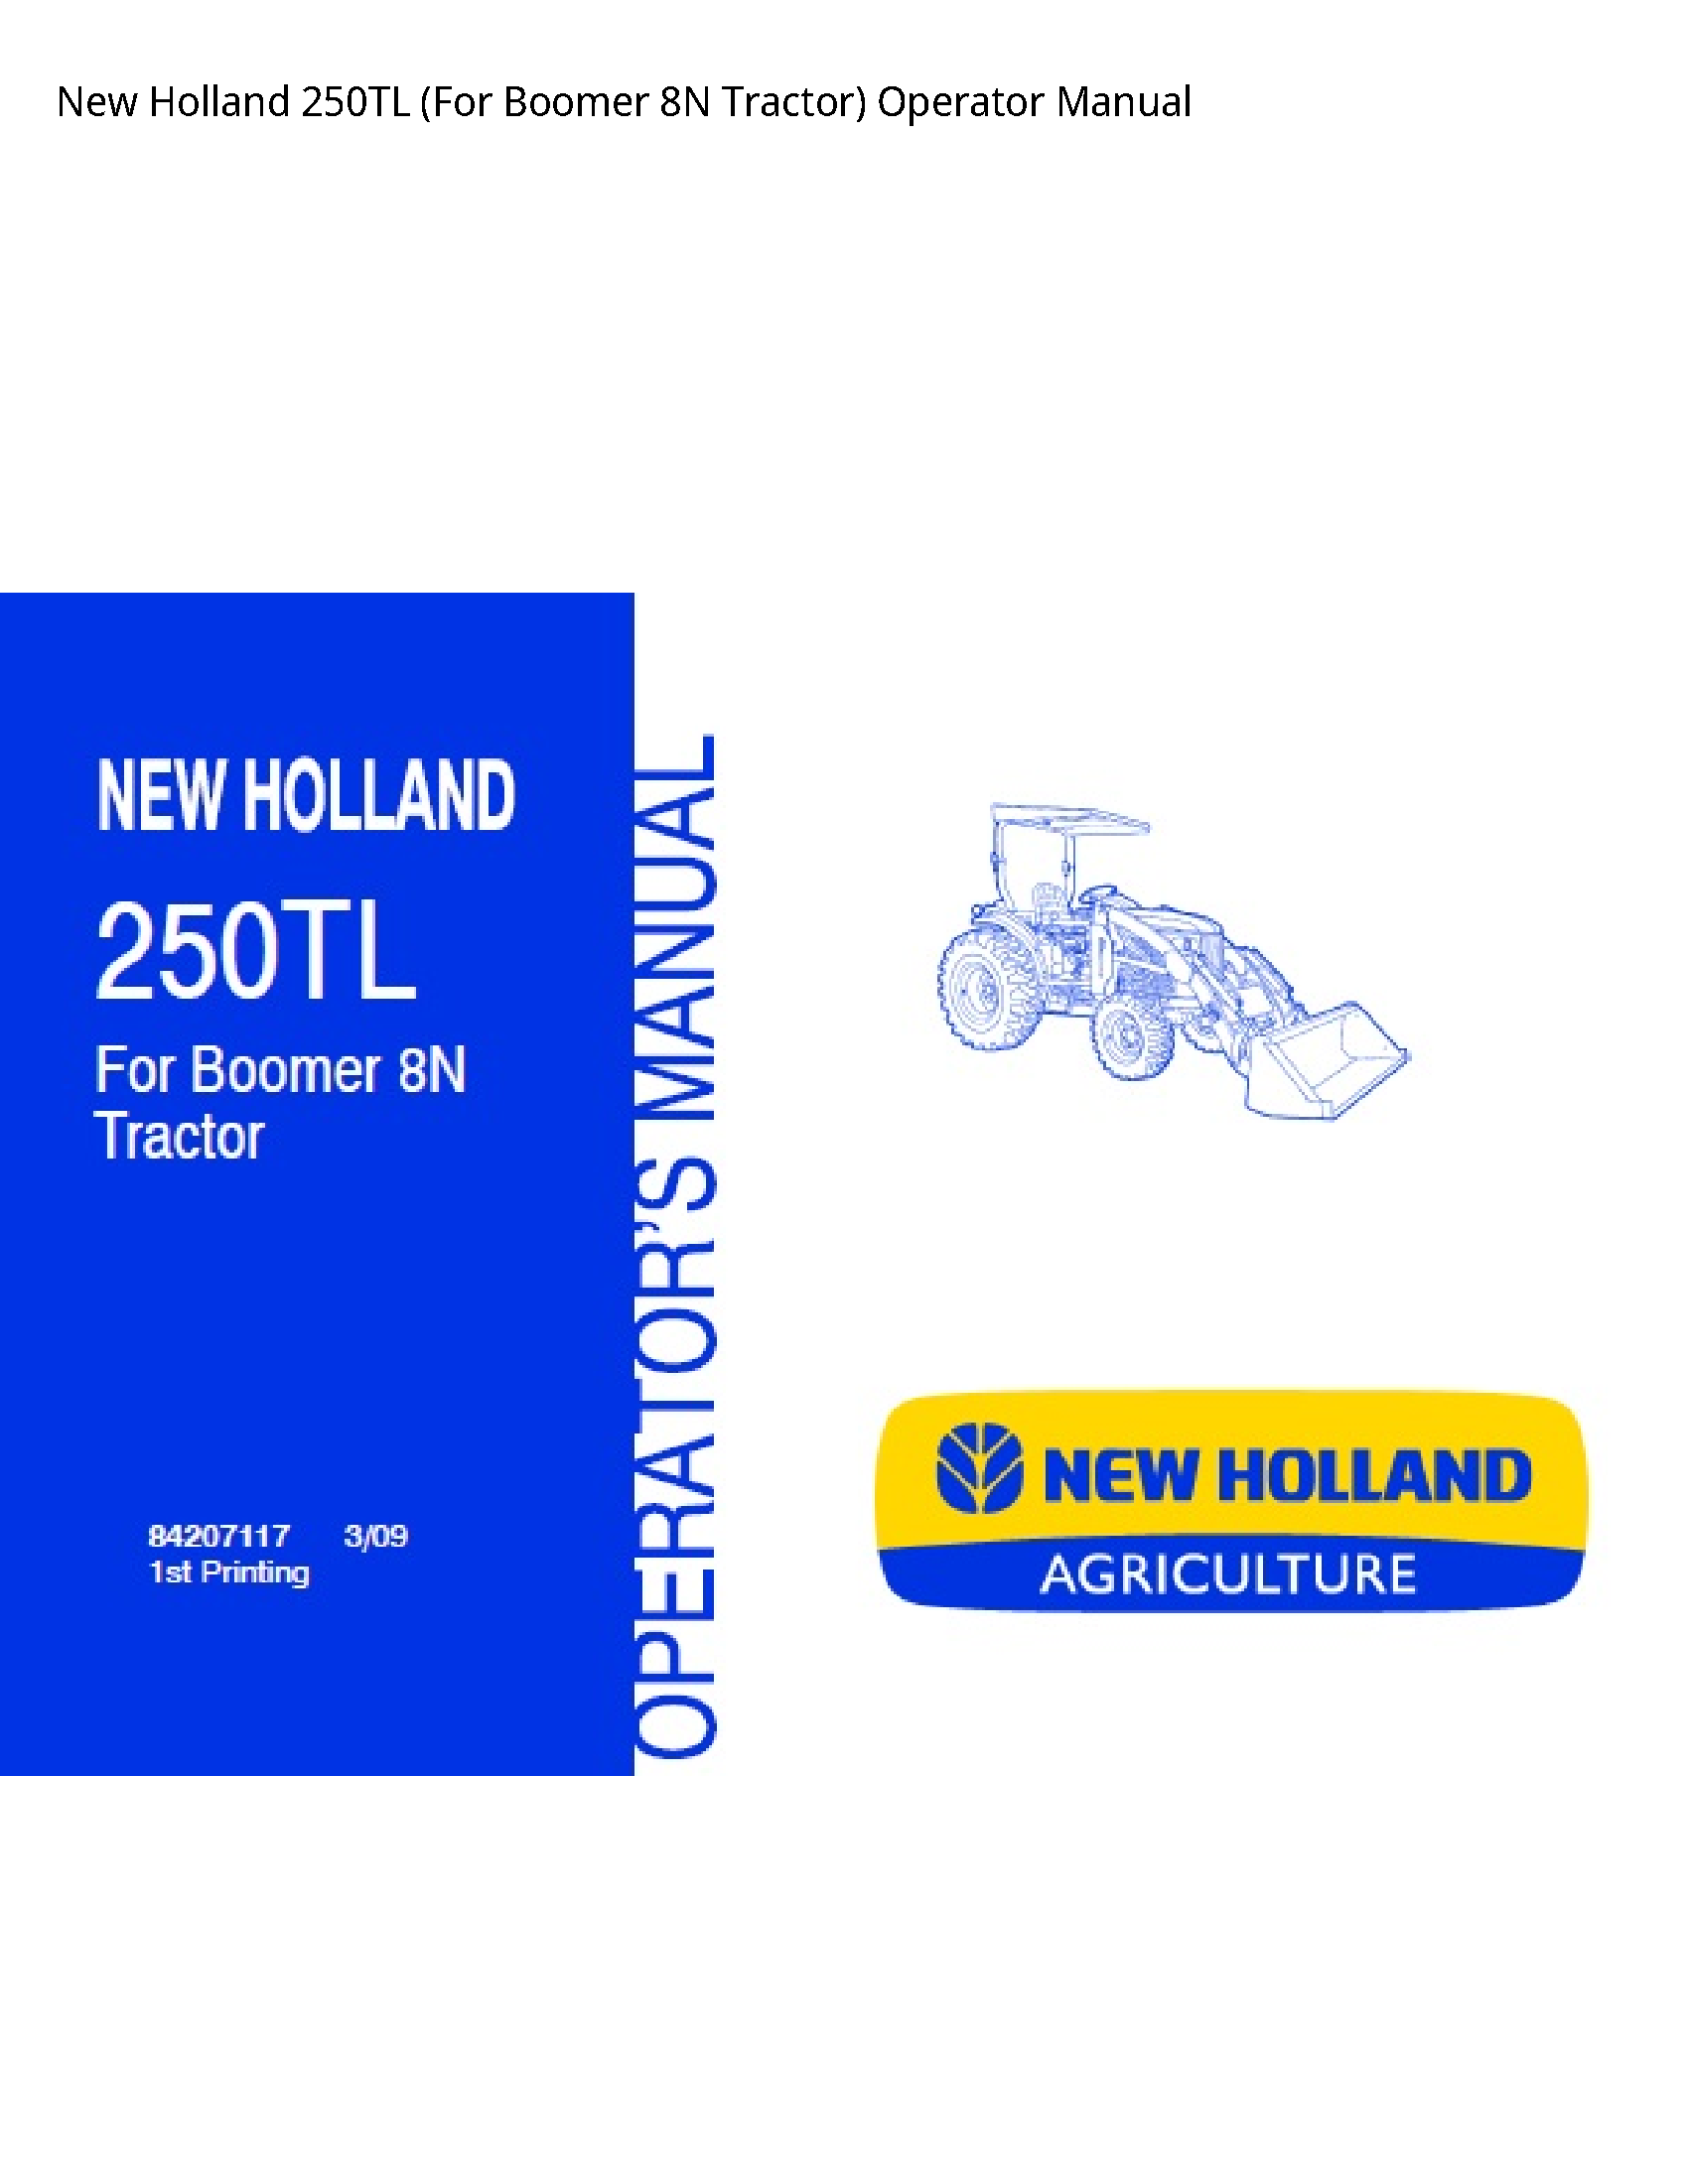 New Holland 250TL (For Boomer Tractor) Operator manual